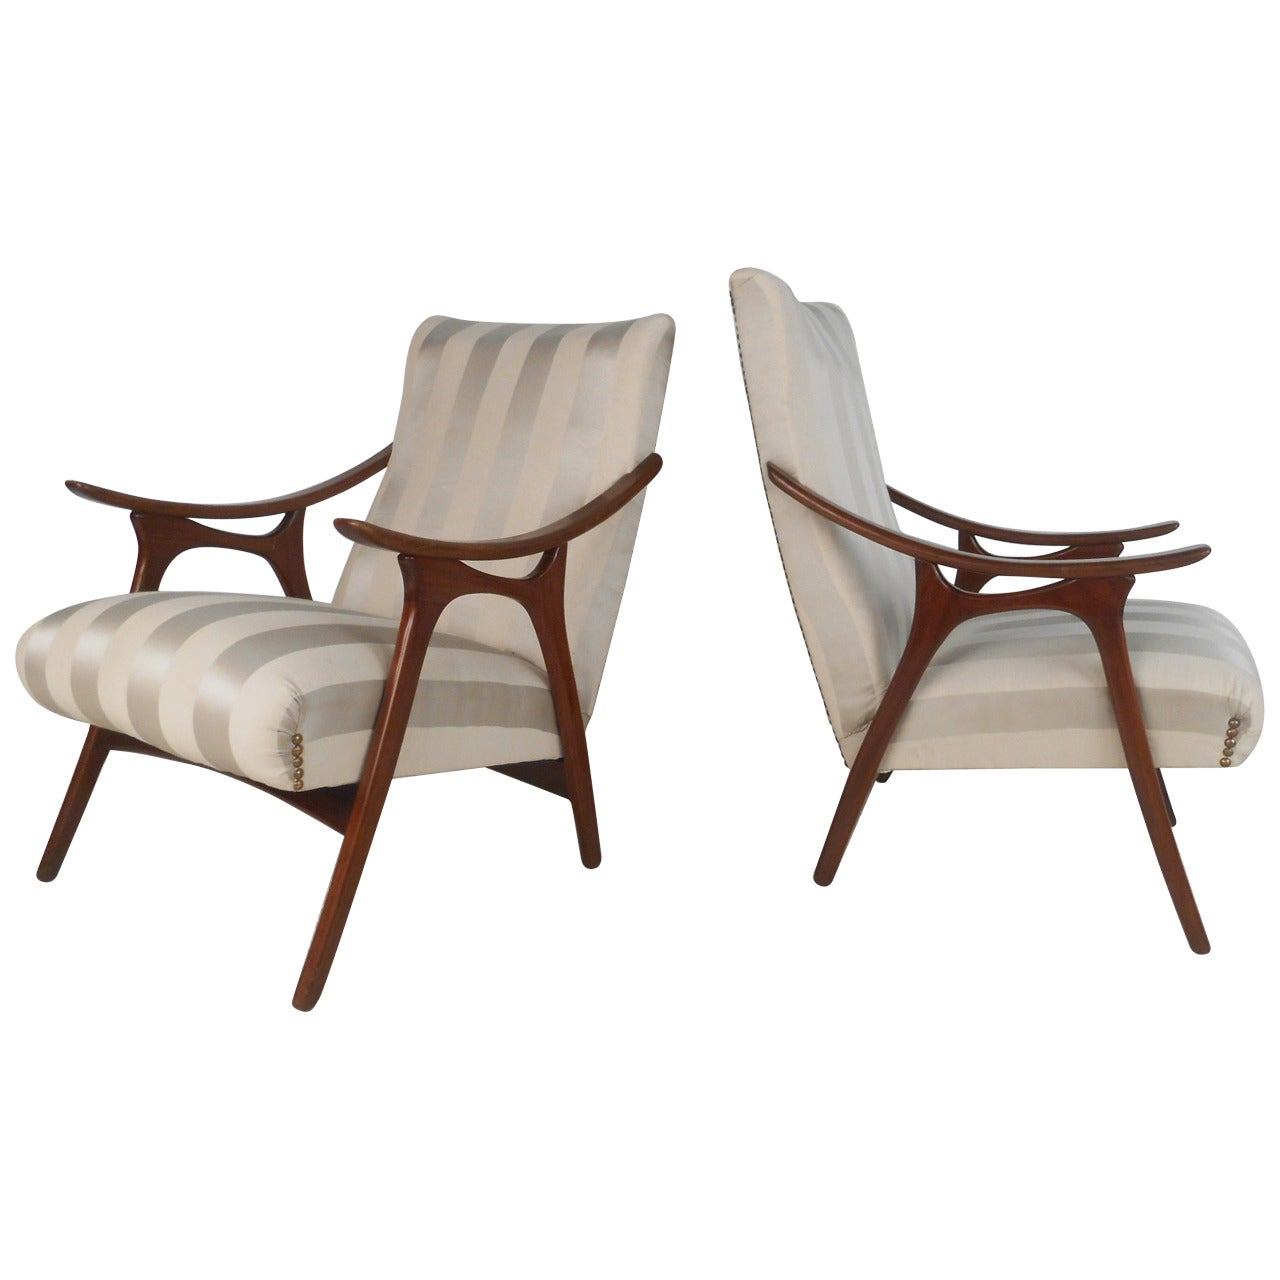 Sculptural Vintage Mid-Century Modern Armchairs For Sale